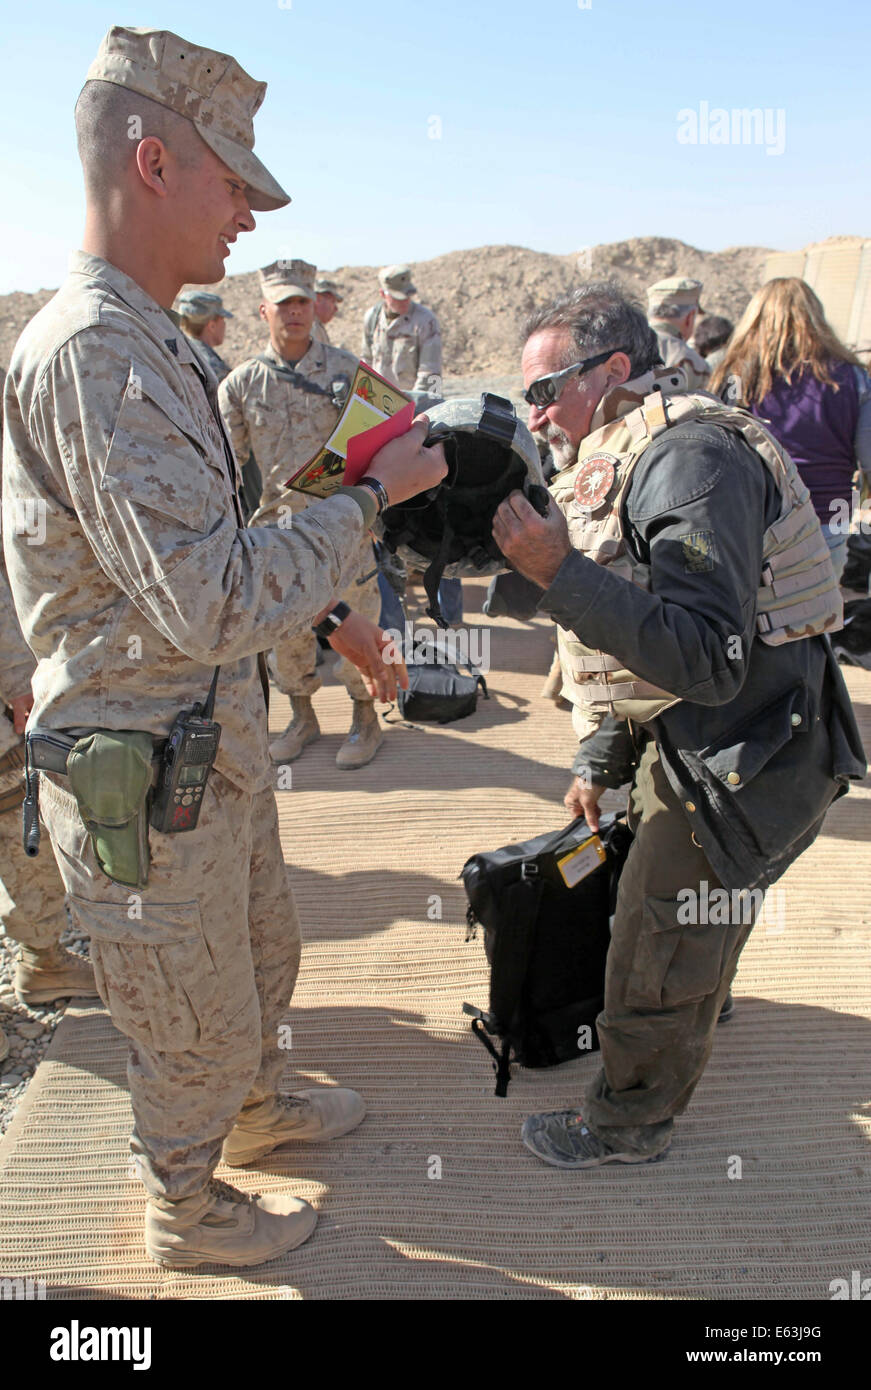 Academy Award winning actor and comedian Robin Williams greets U.S. Marines during the 2010 USO Holiday Tour December 16, 2010 in Marjah, Helmand province, Afghanistan. Stock Photo